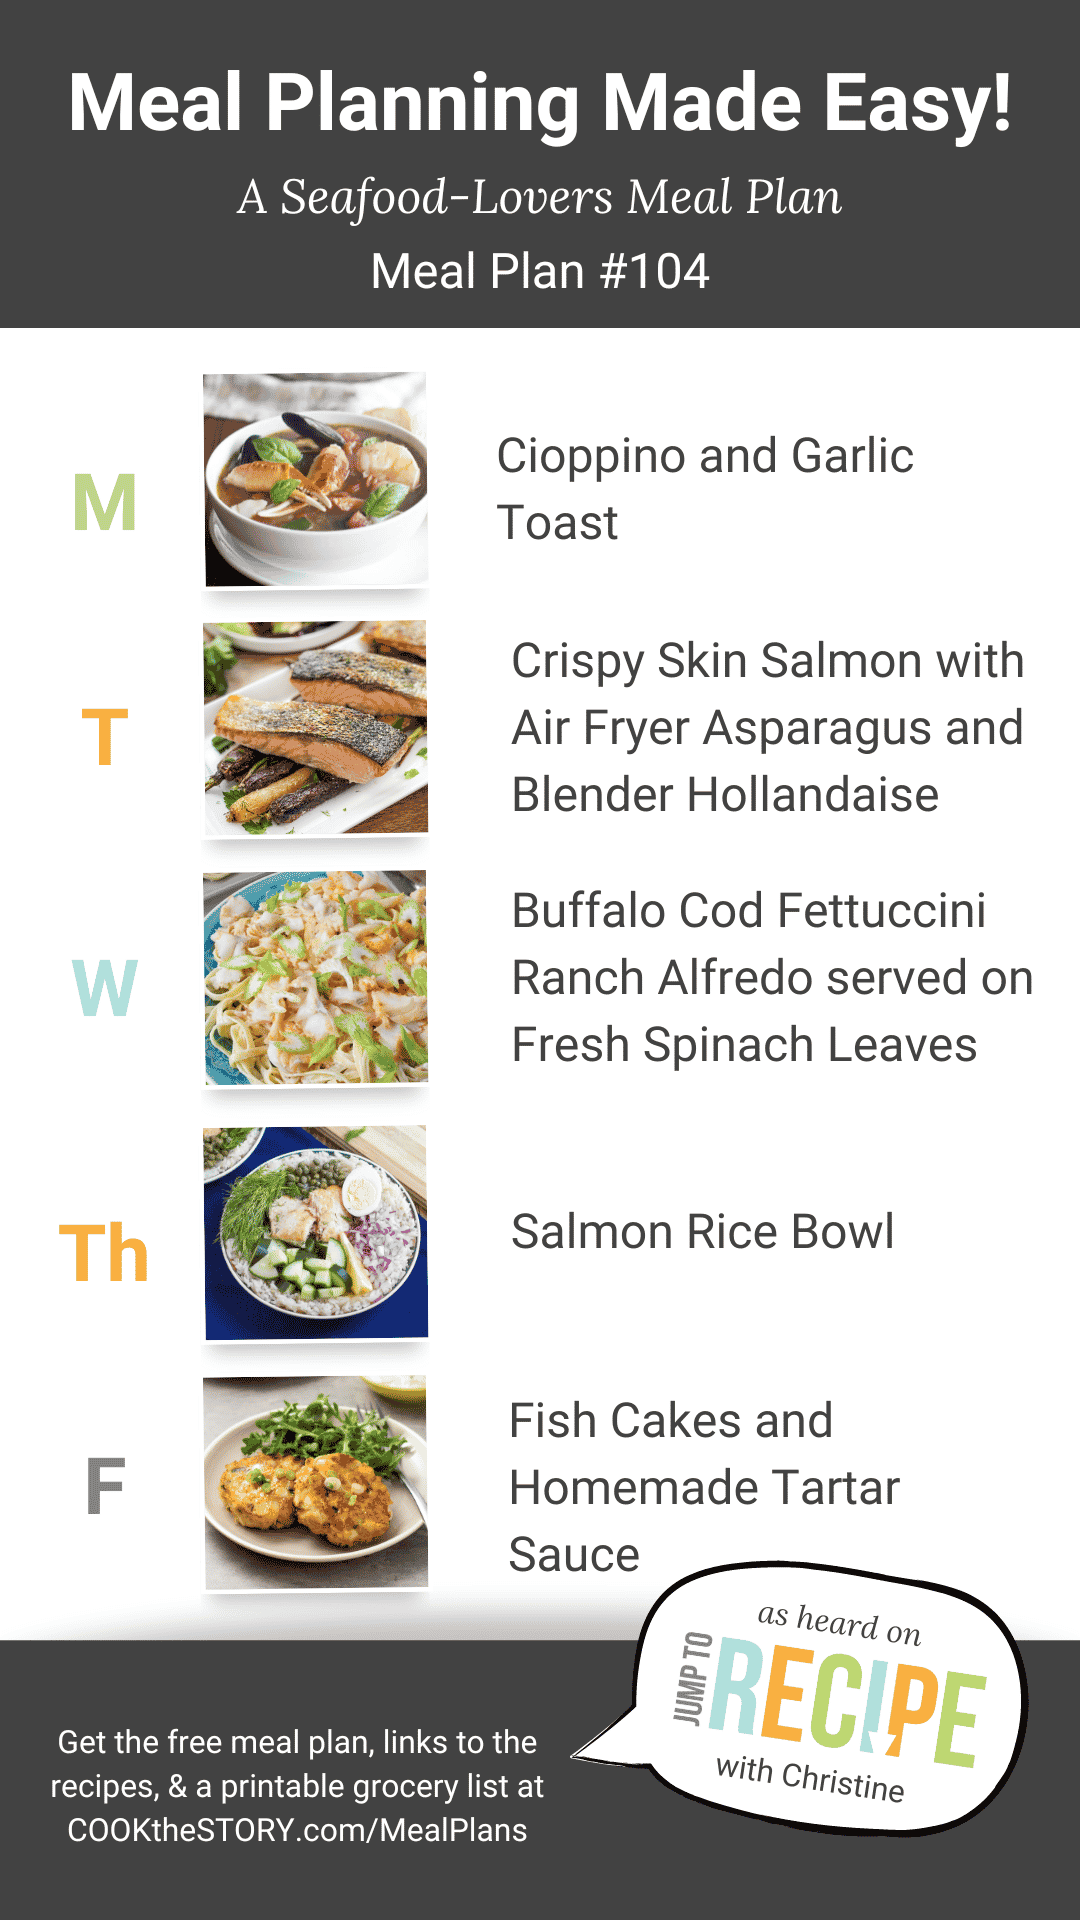 Meal Plan #104: A Seafood-Lovers Meal Plan